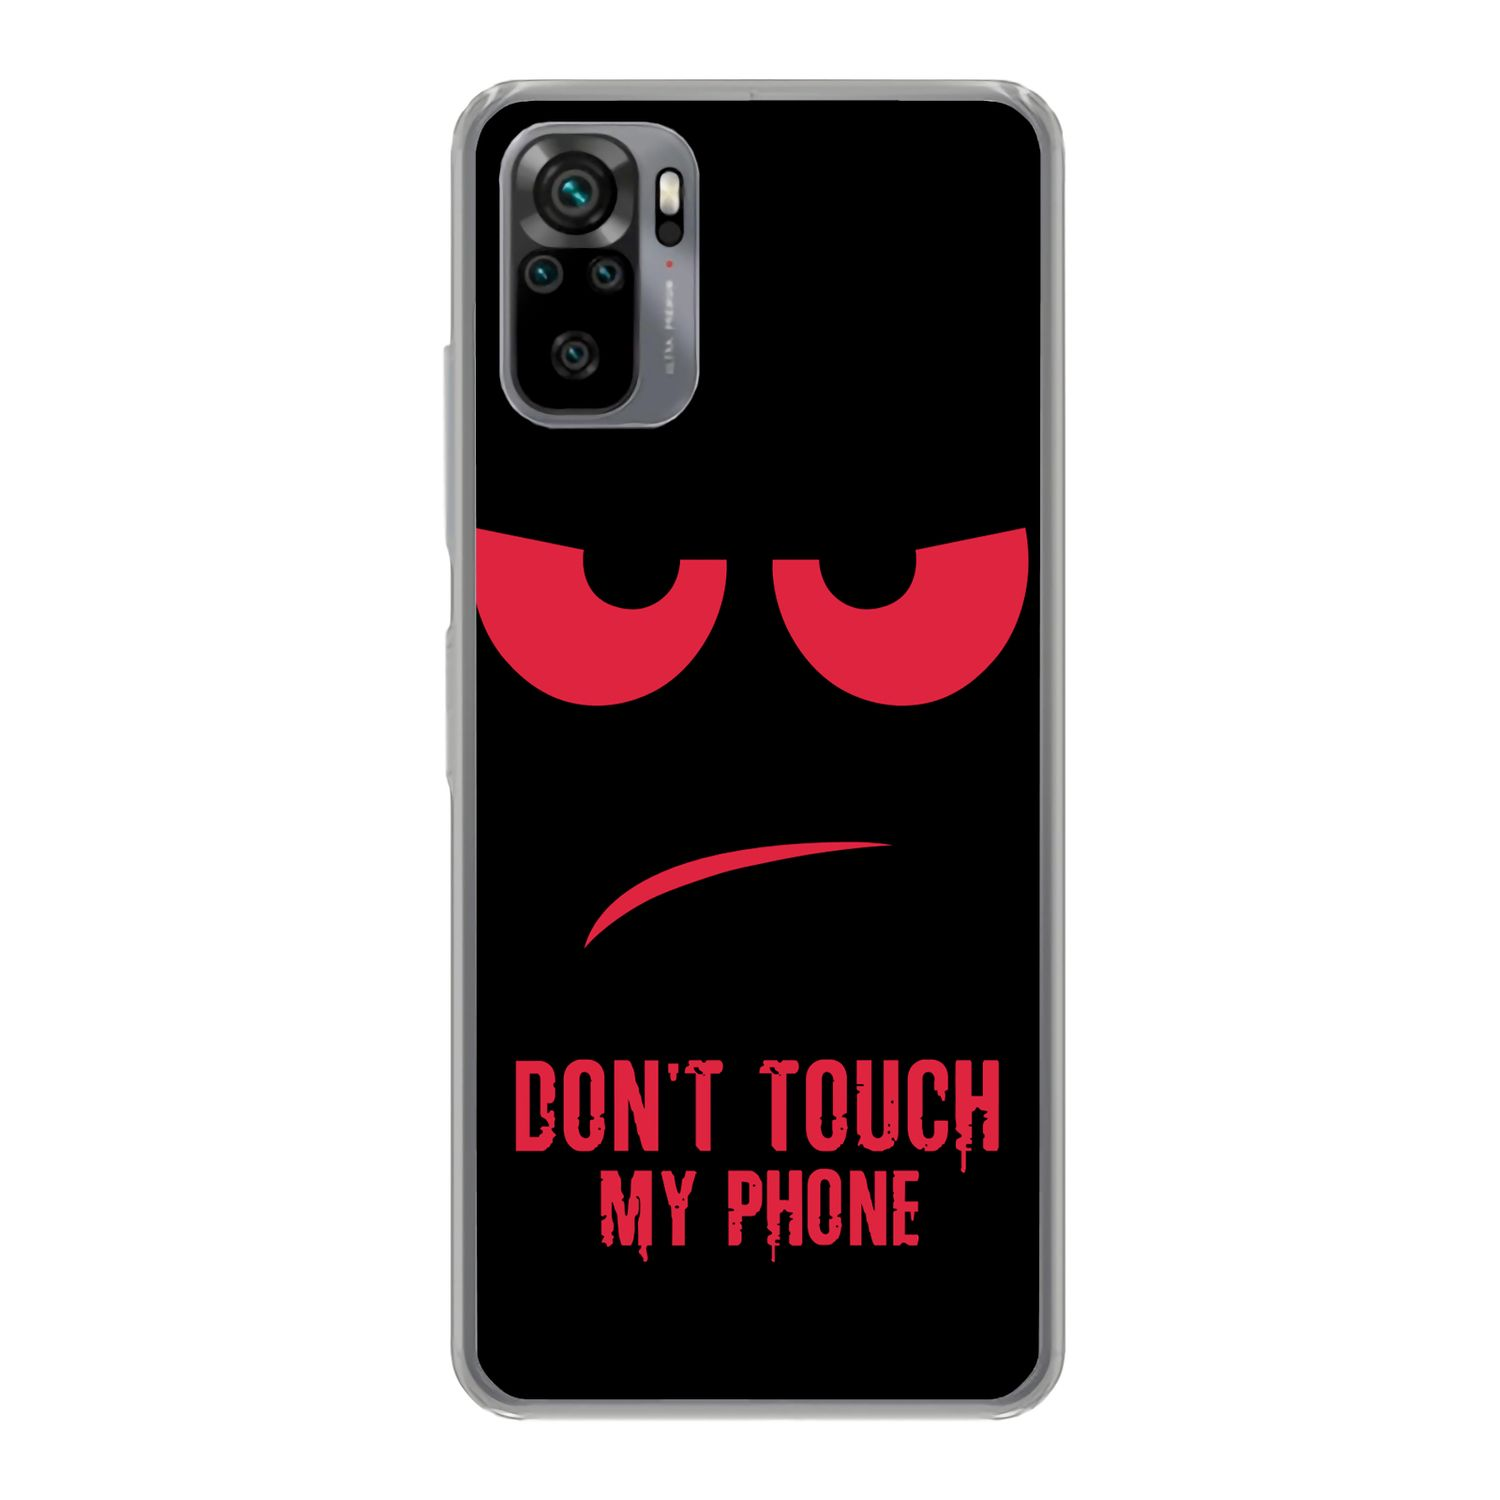 KÖNIG Touch My Rot Xiaomi, Dont 10S, Note Backcover, Phone Redmi Case, DESIGN